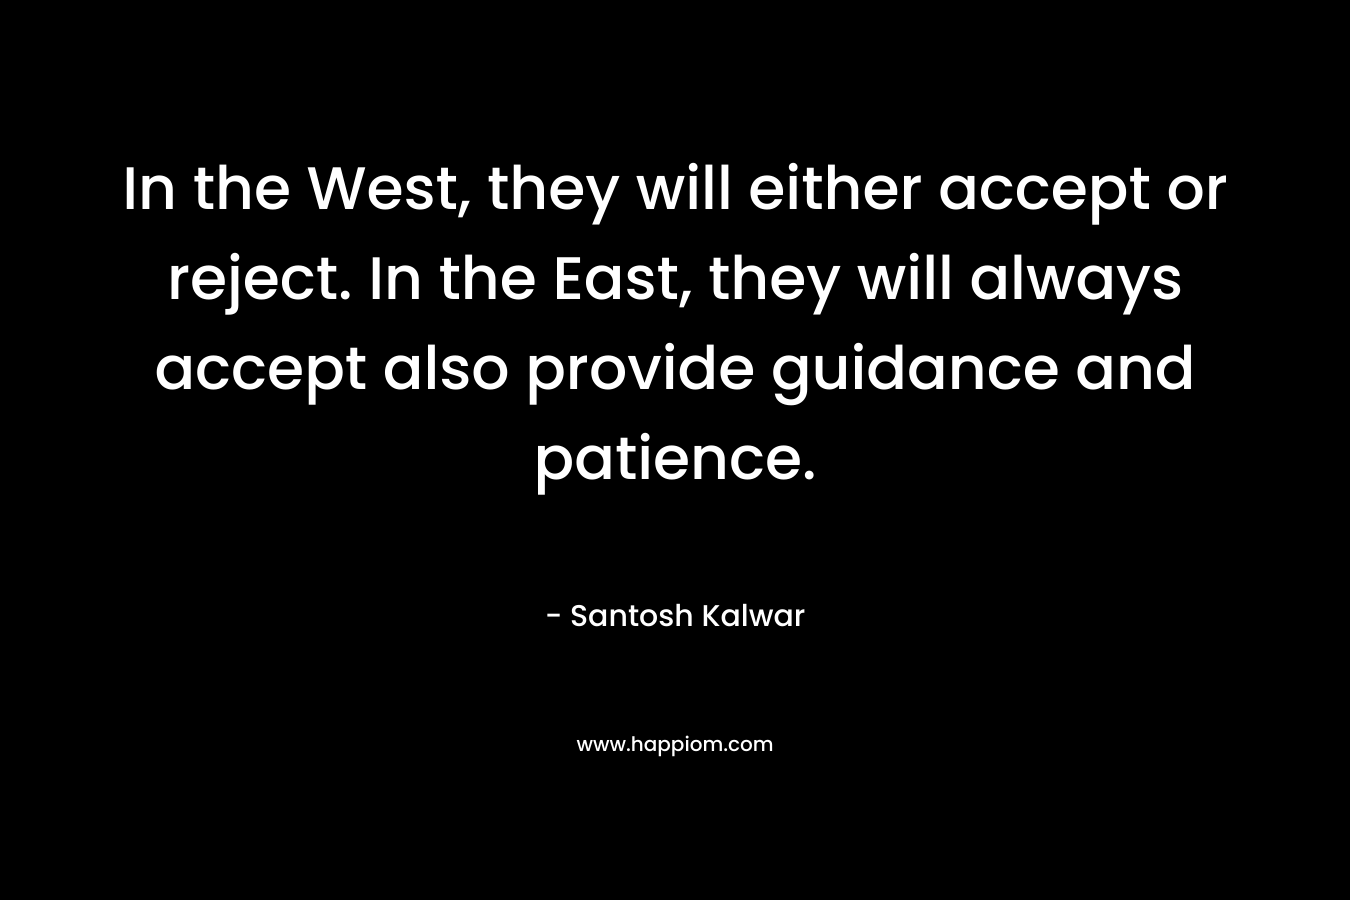 In the West, they will either accept or reject. In the East, they will always accept also provide guidance and patience. – Santosh Kalwar